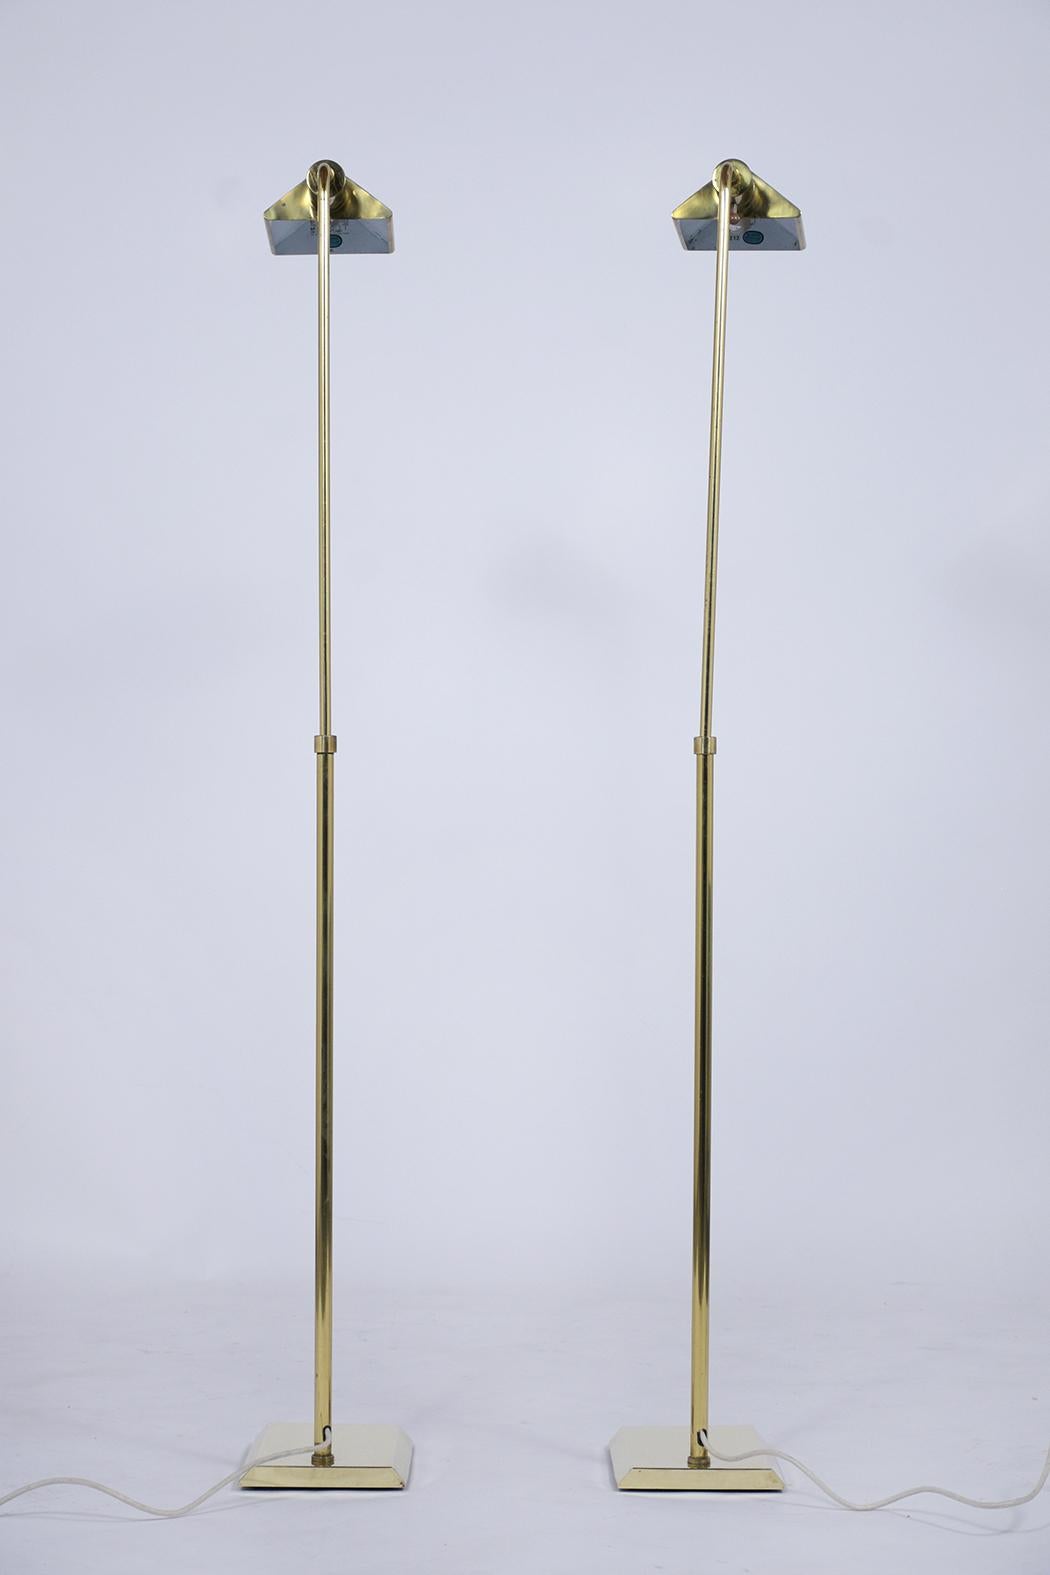 Hand-Crafted Koch & Lowy Brass Reading Floor Lamps